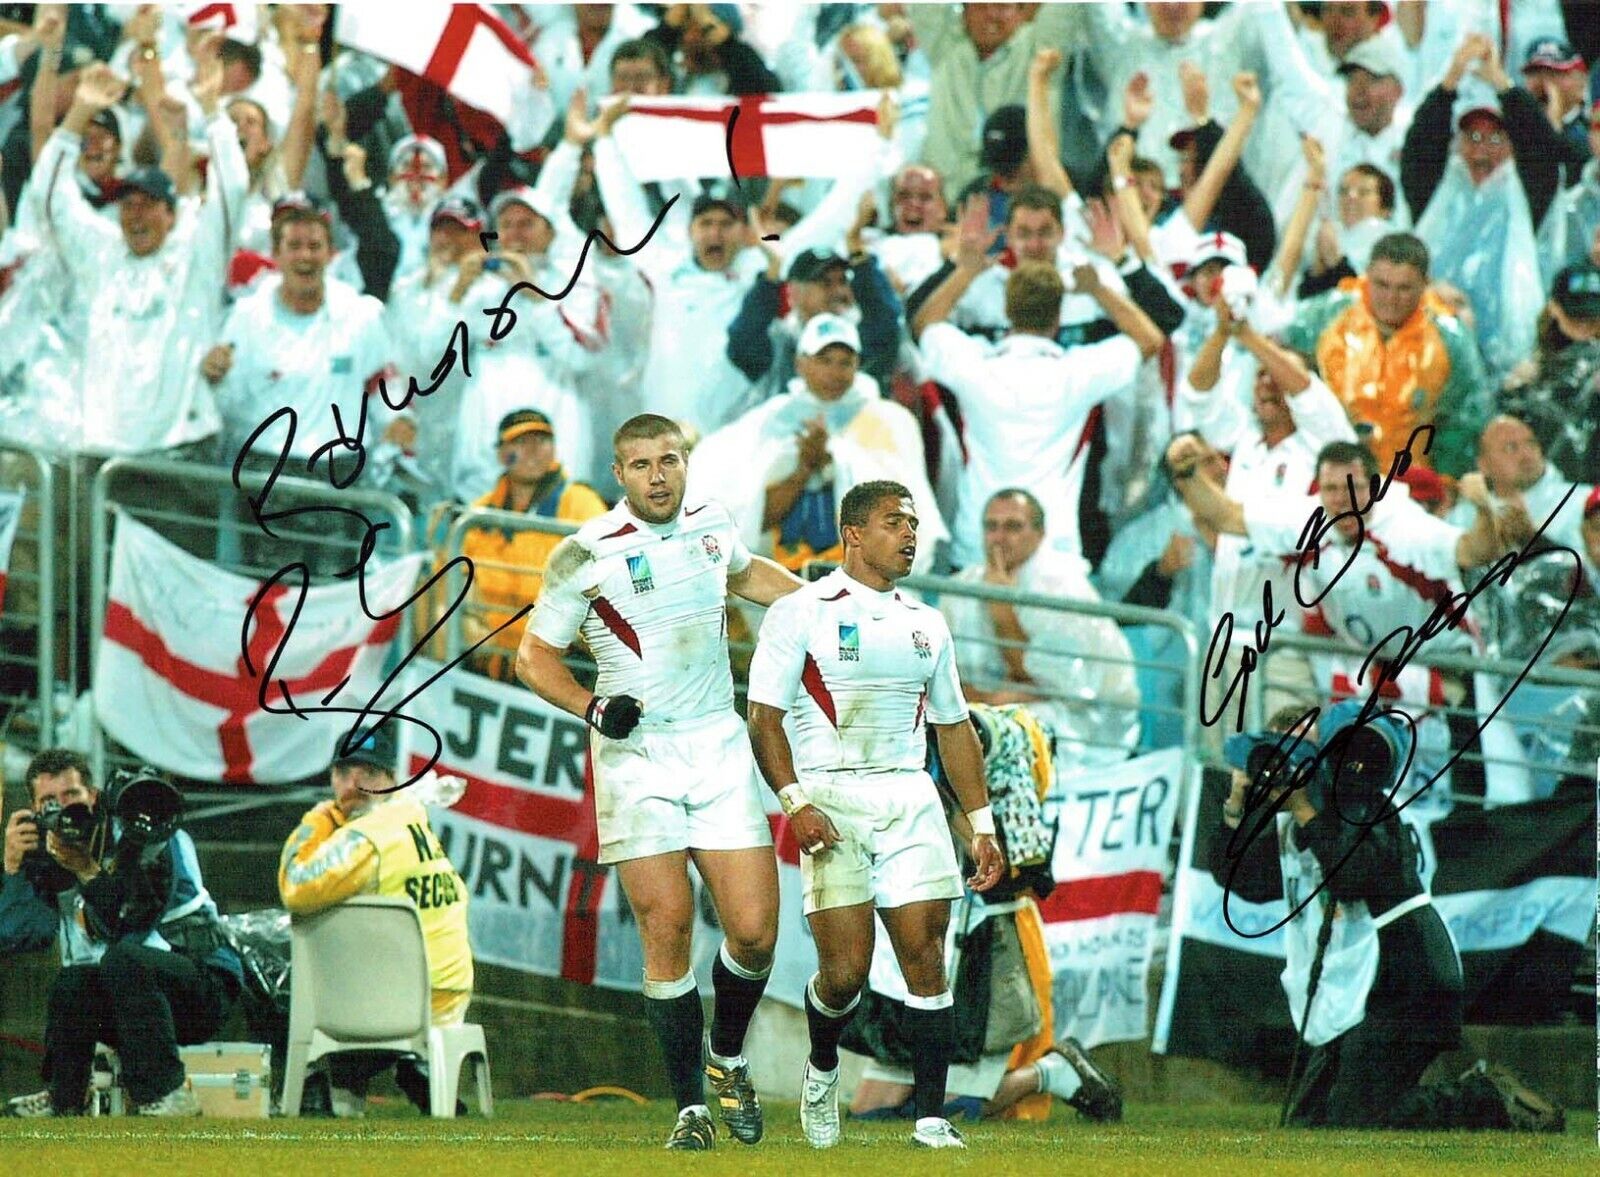 Jason ROBINSON & Ben COHEN RUGBY Signed 16x12 Huge World Cup Photo Poster painting 2 AFTAL COA